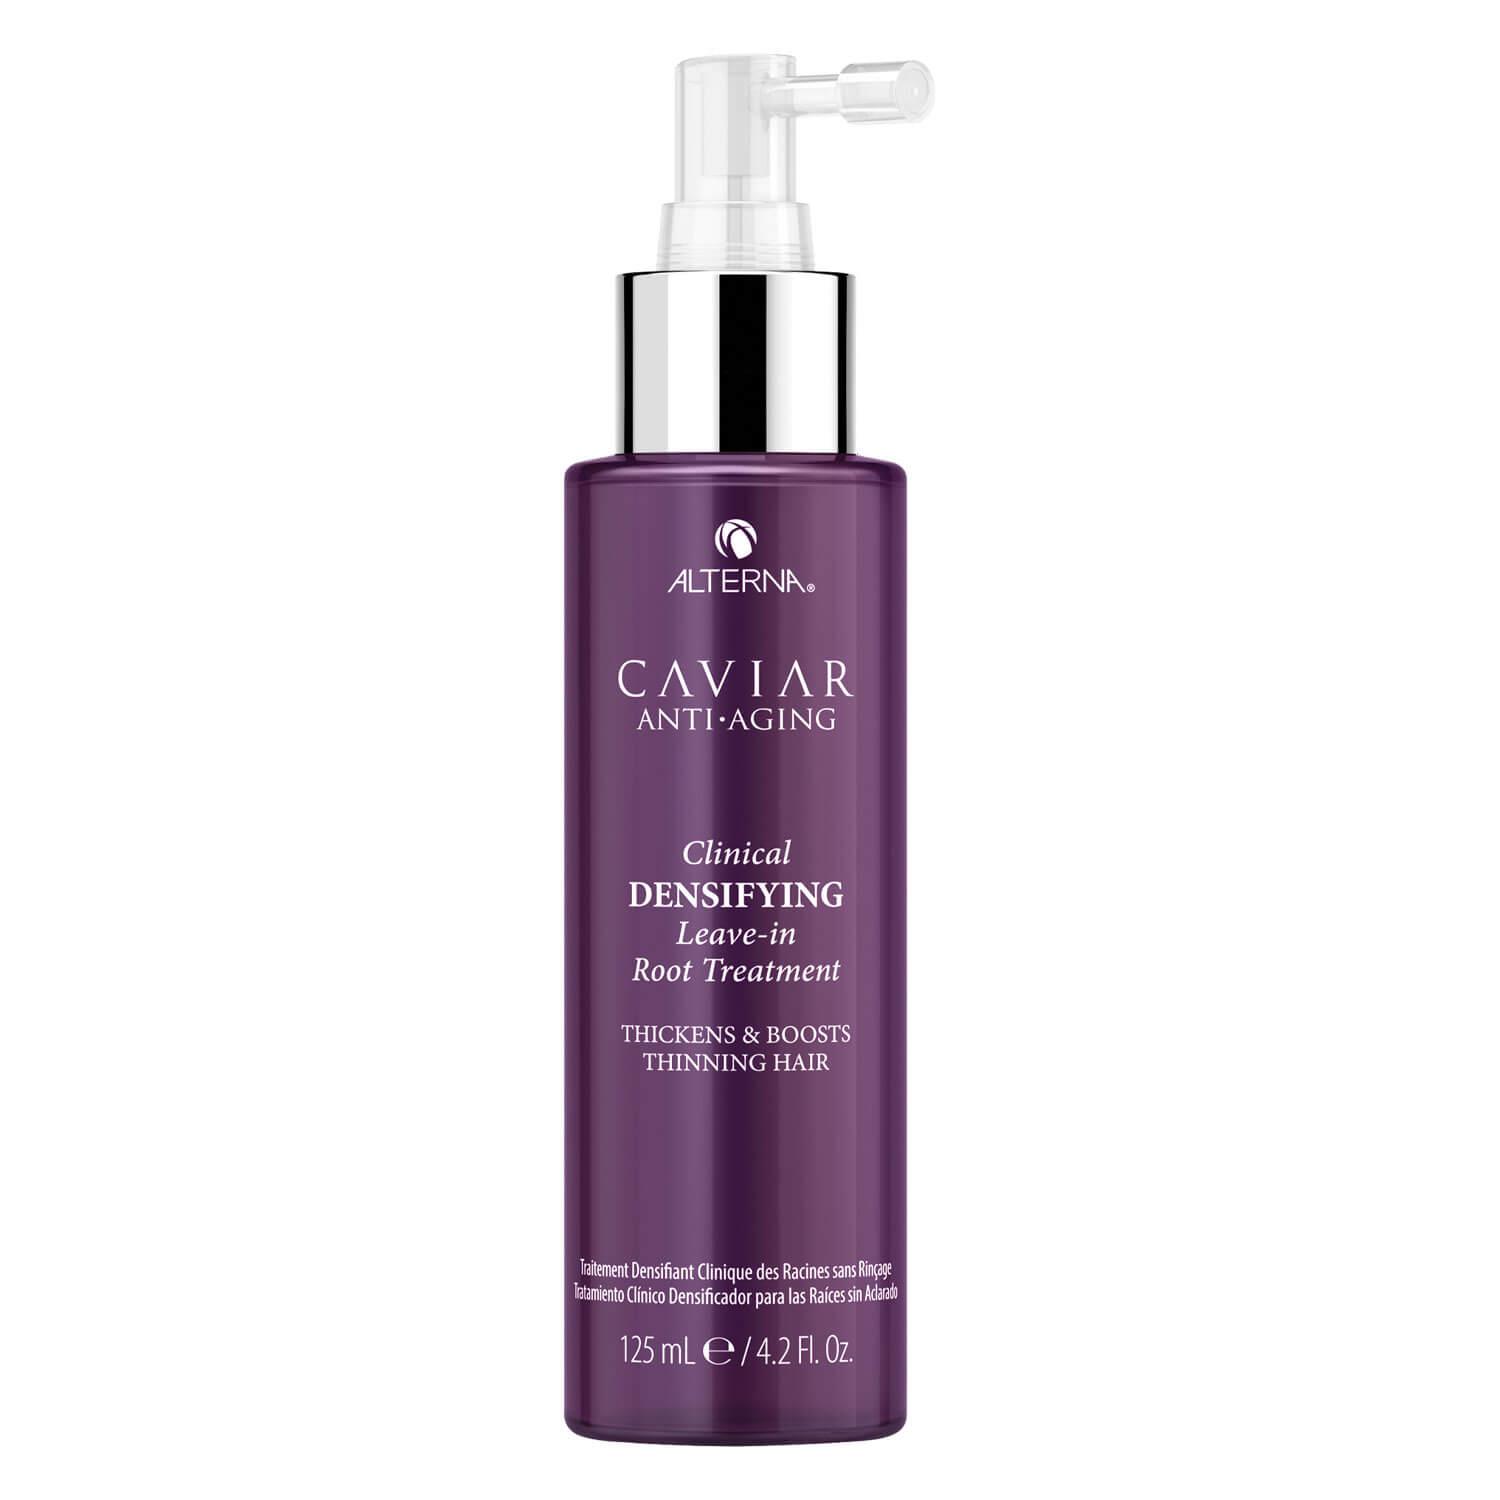 Caviar Clinical - Densifying Root Treatment